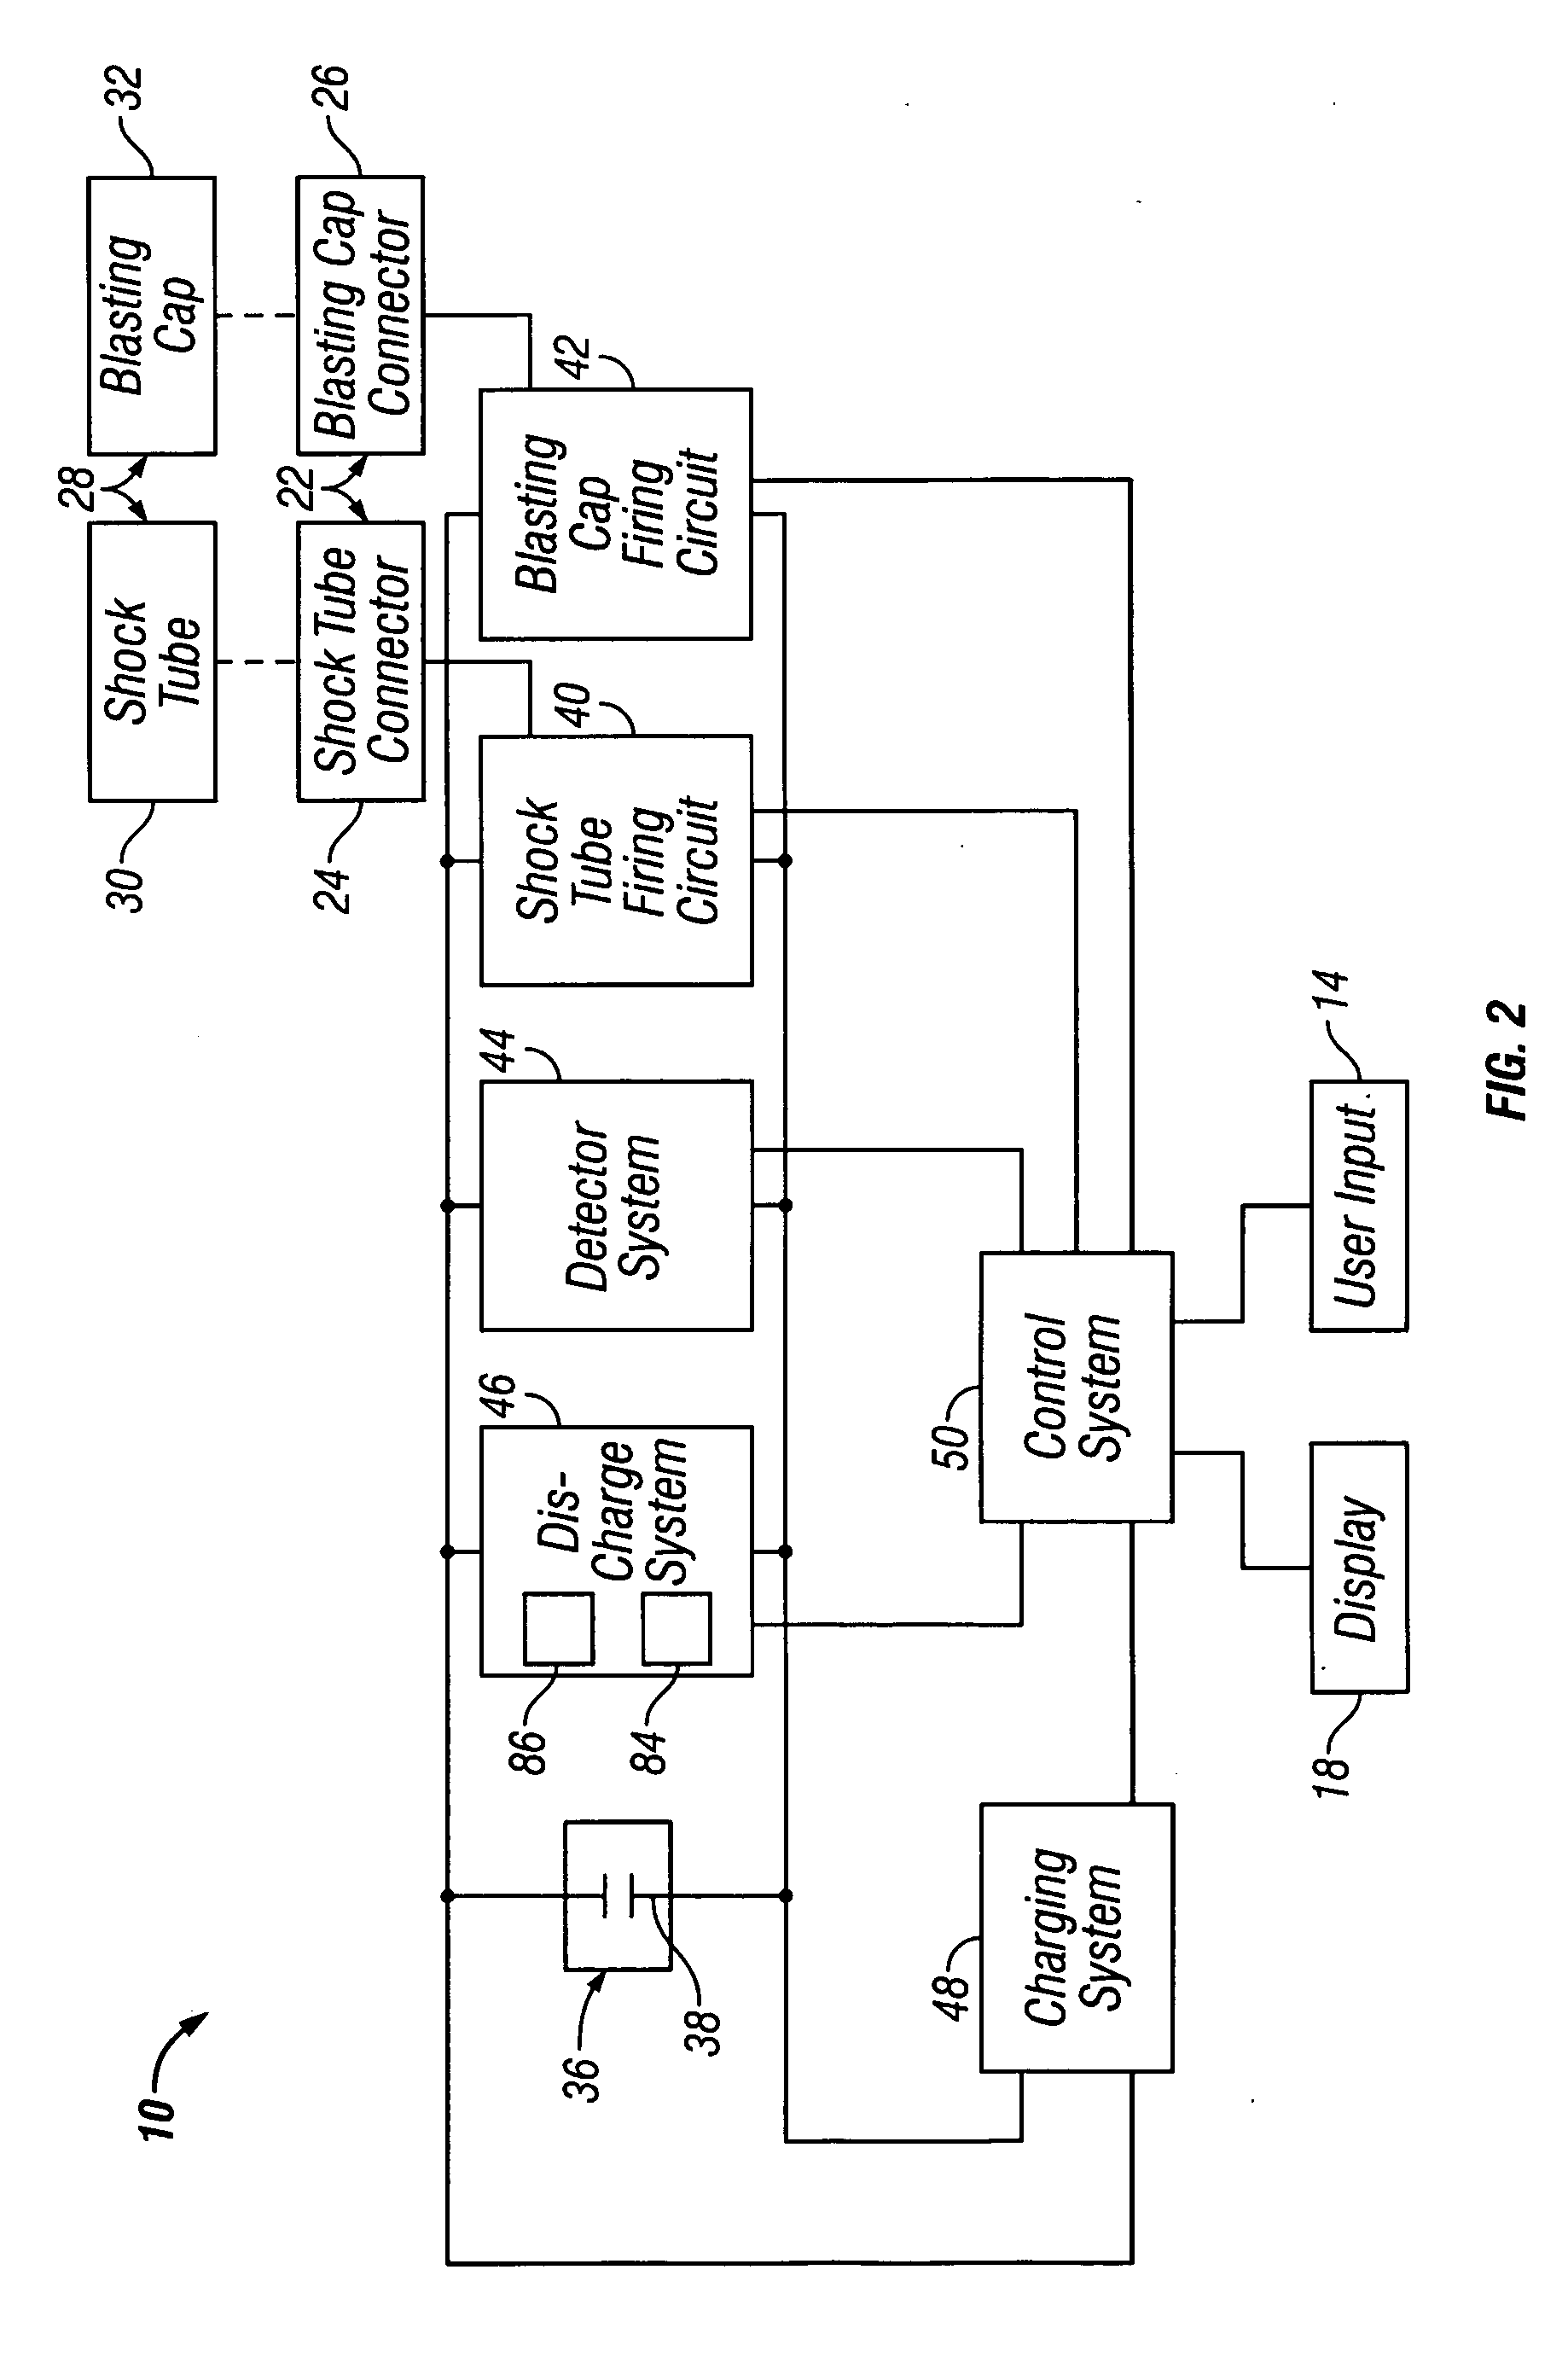 Electronic firing systems and methods for firing a device